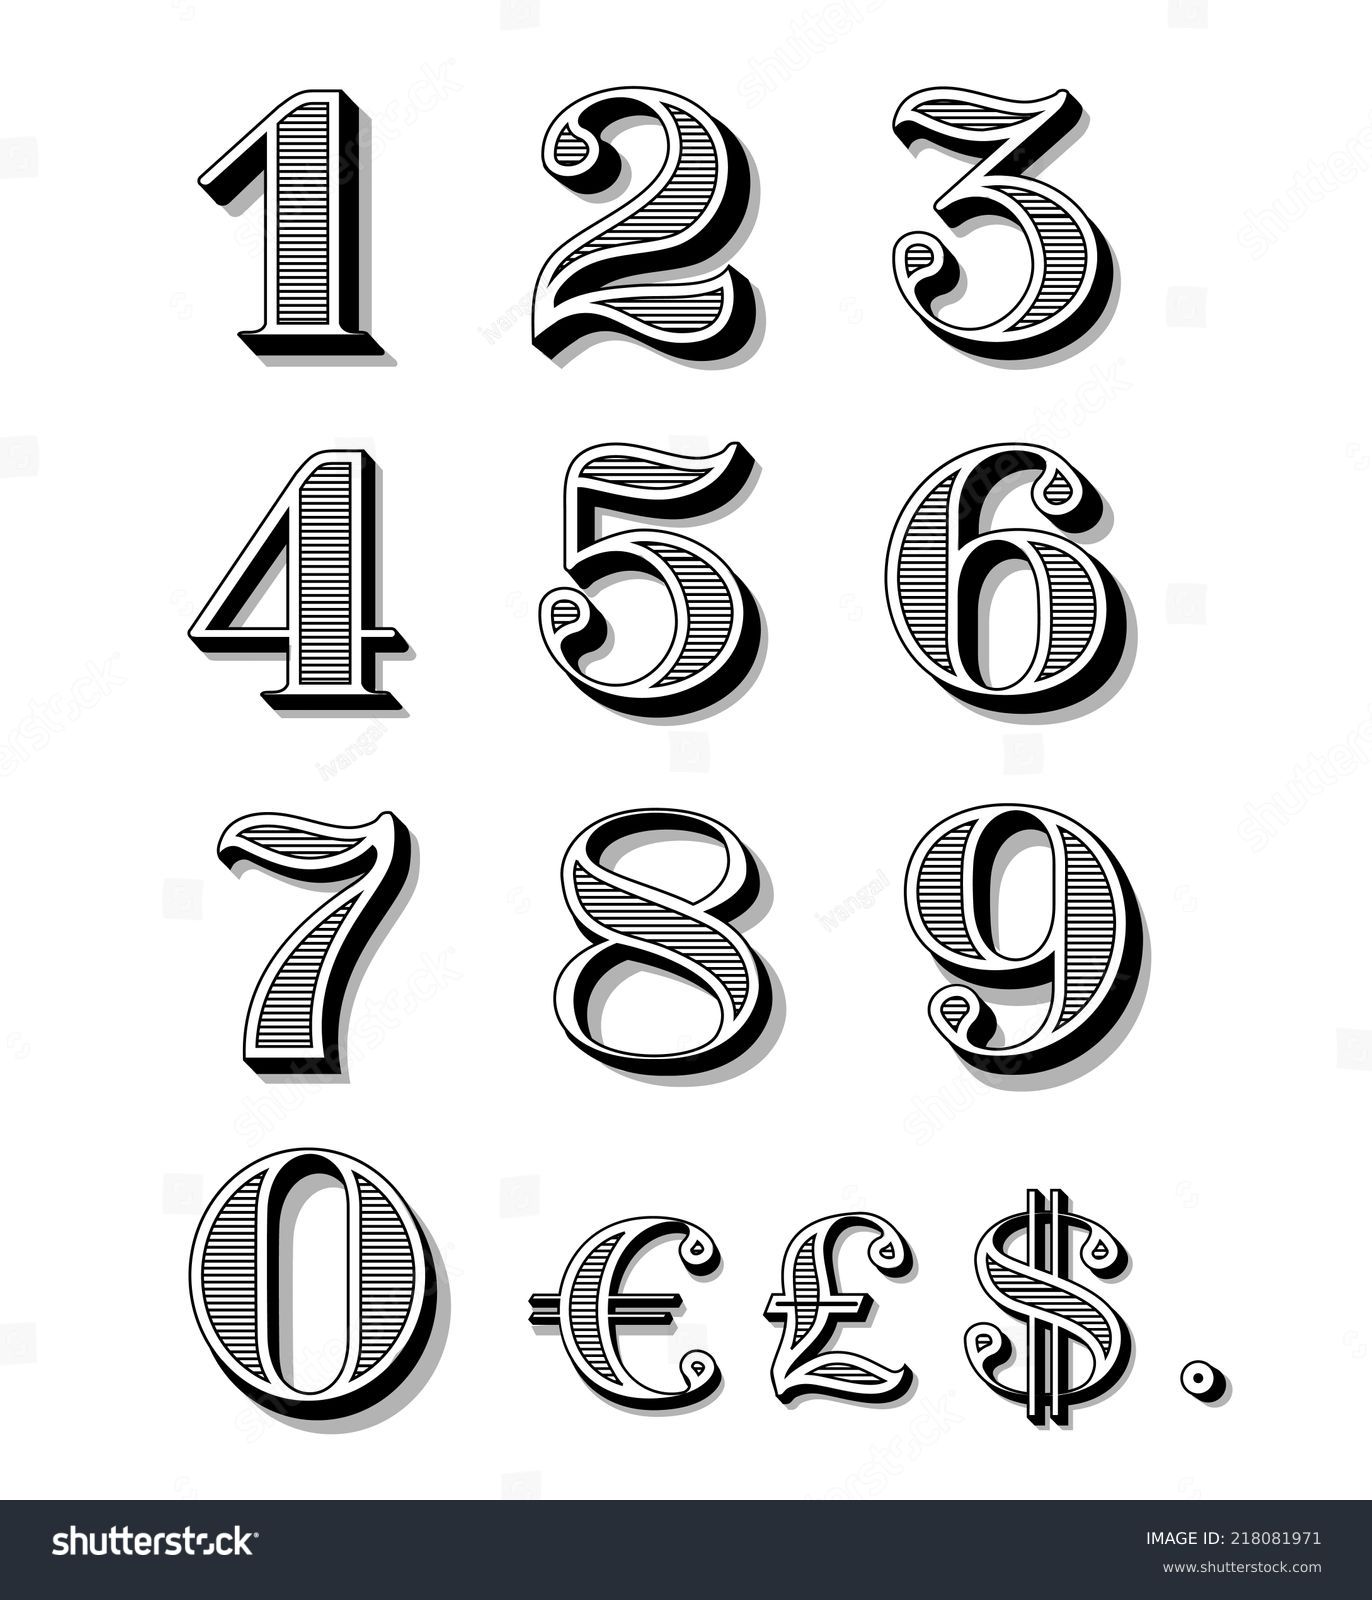 vintage numbers clipart - photo #14